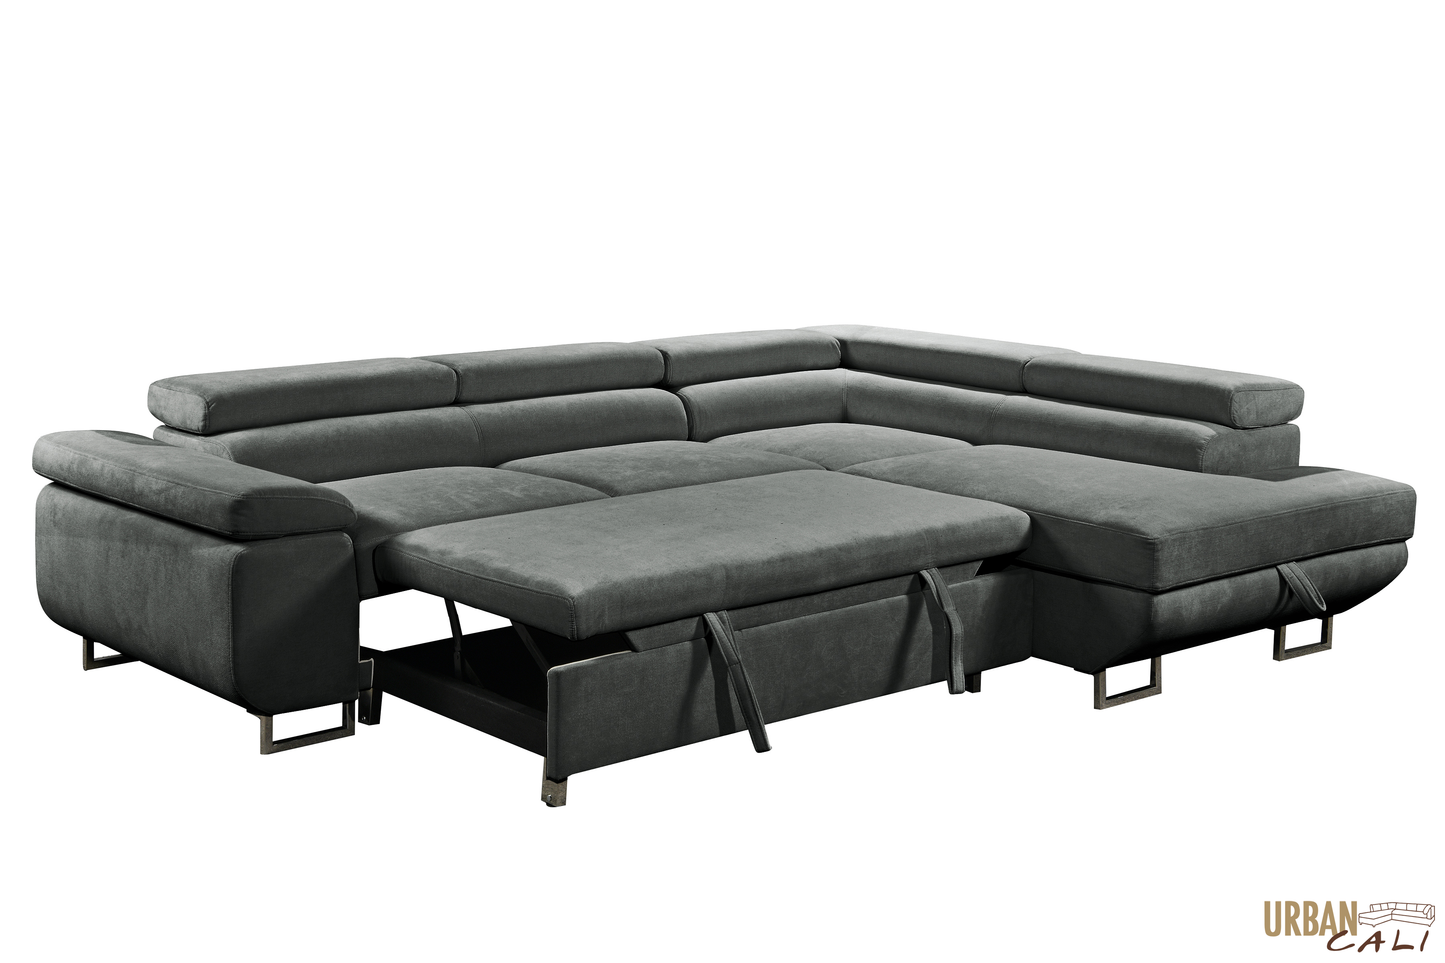 Hollywood Sleeper Sectional Sofa Bed with Adjustable Headrests and Storage Chaise - Available in 2 Colours